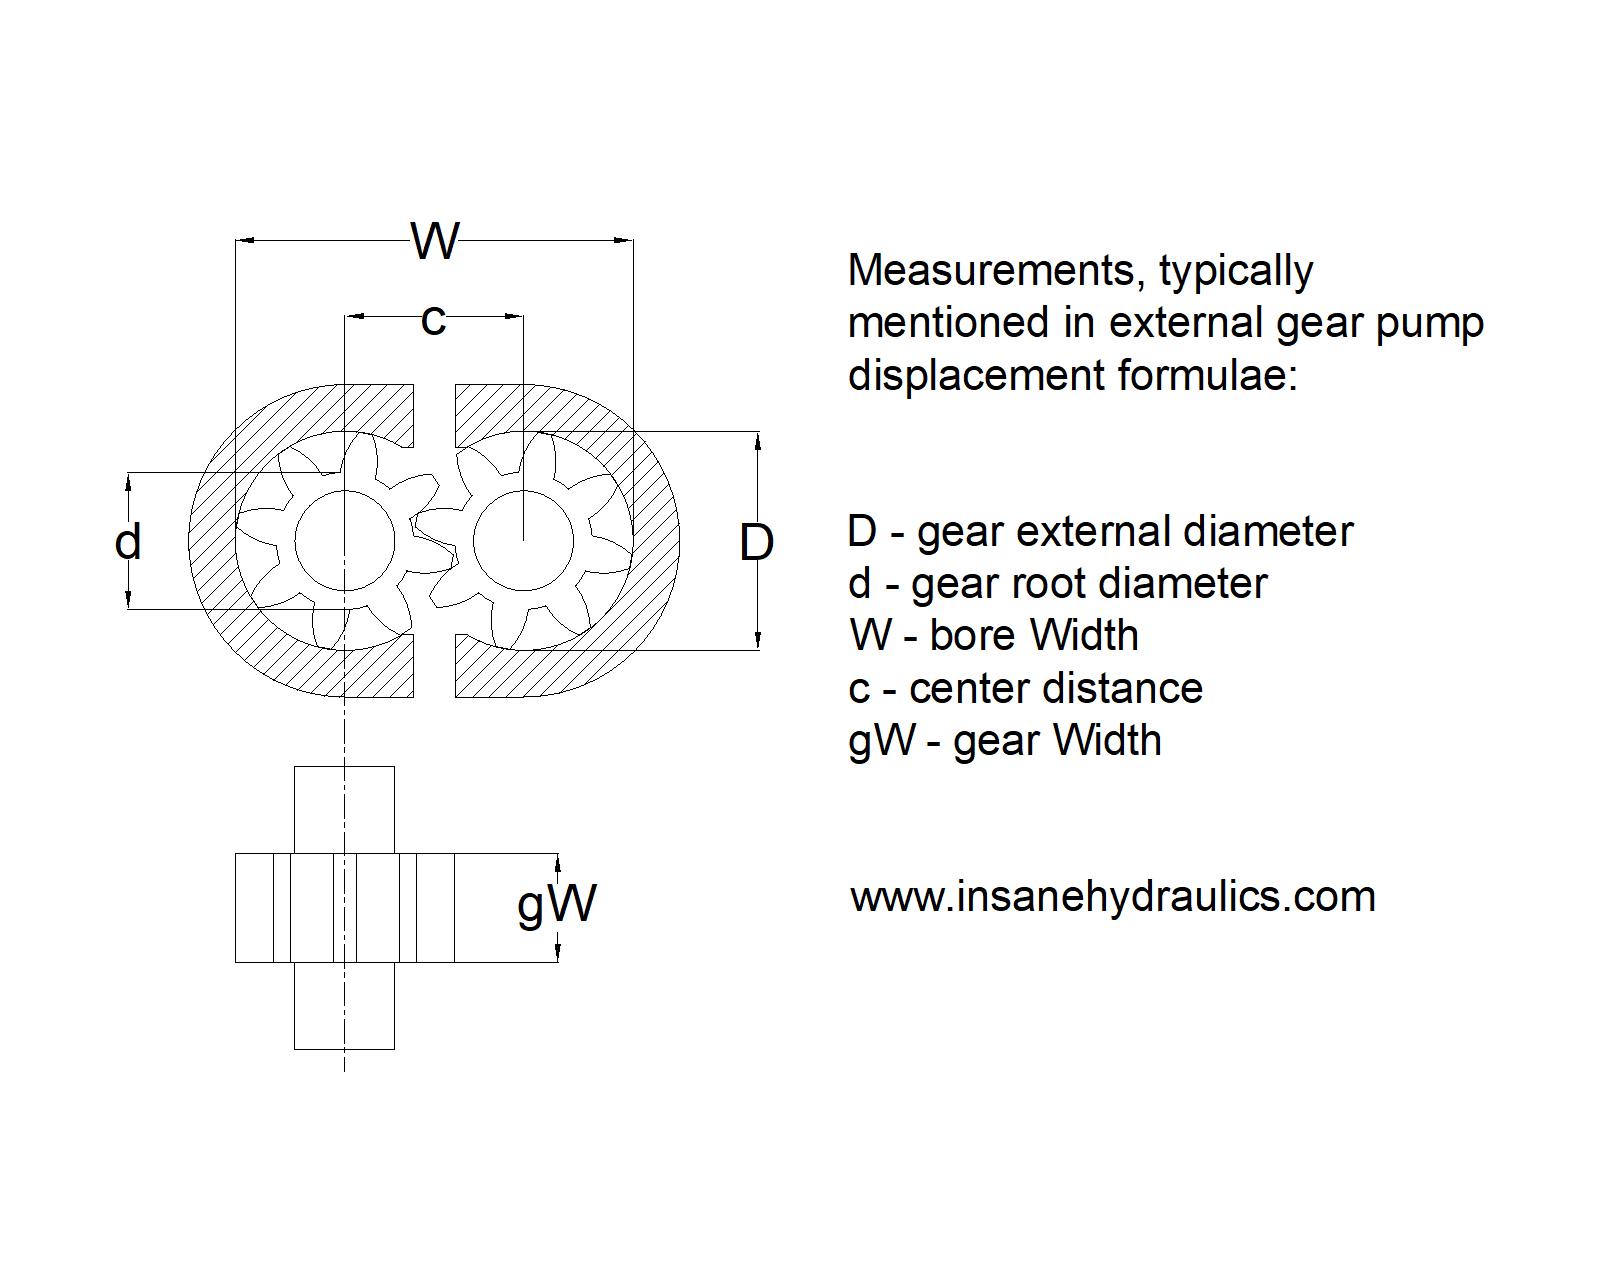 Measurements you can take of a gear pump to calculate its displacement